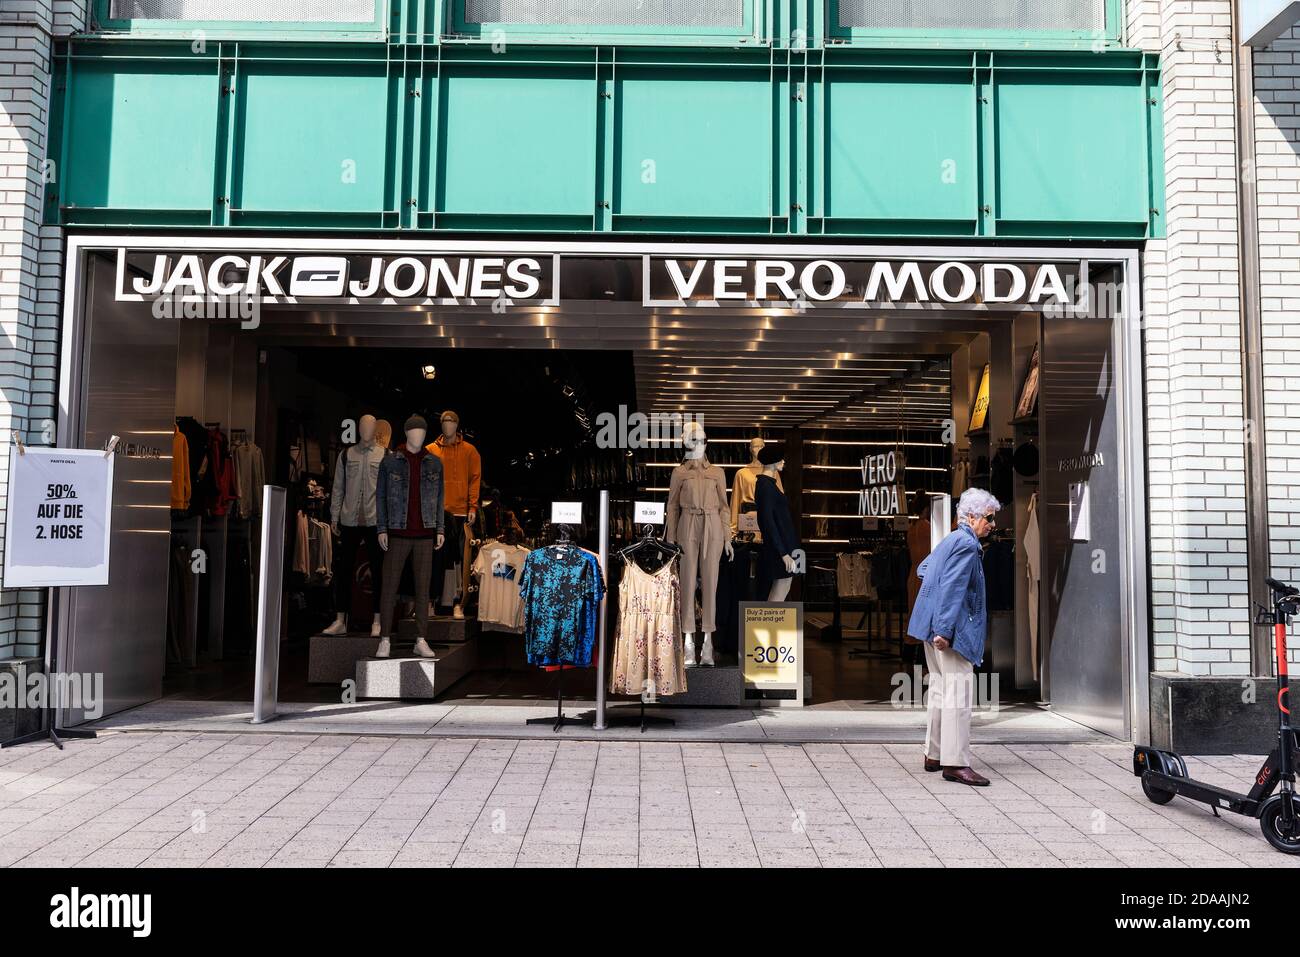 Hamburg, Germany - August 23, 2019: Facade of a Jack and Jones clothing store with a senior woman around in Spitalerstraße, shopping street in Altstad Stock Photo